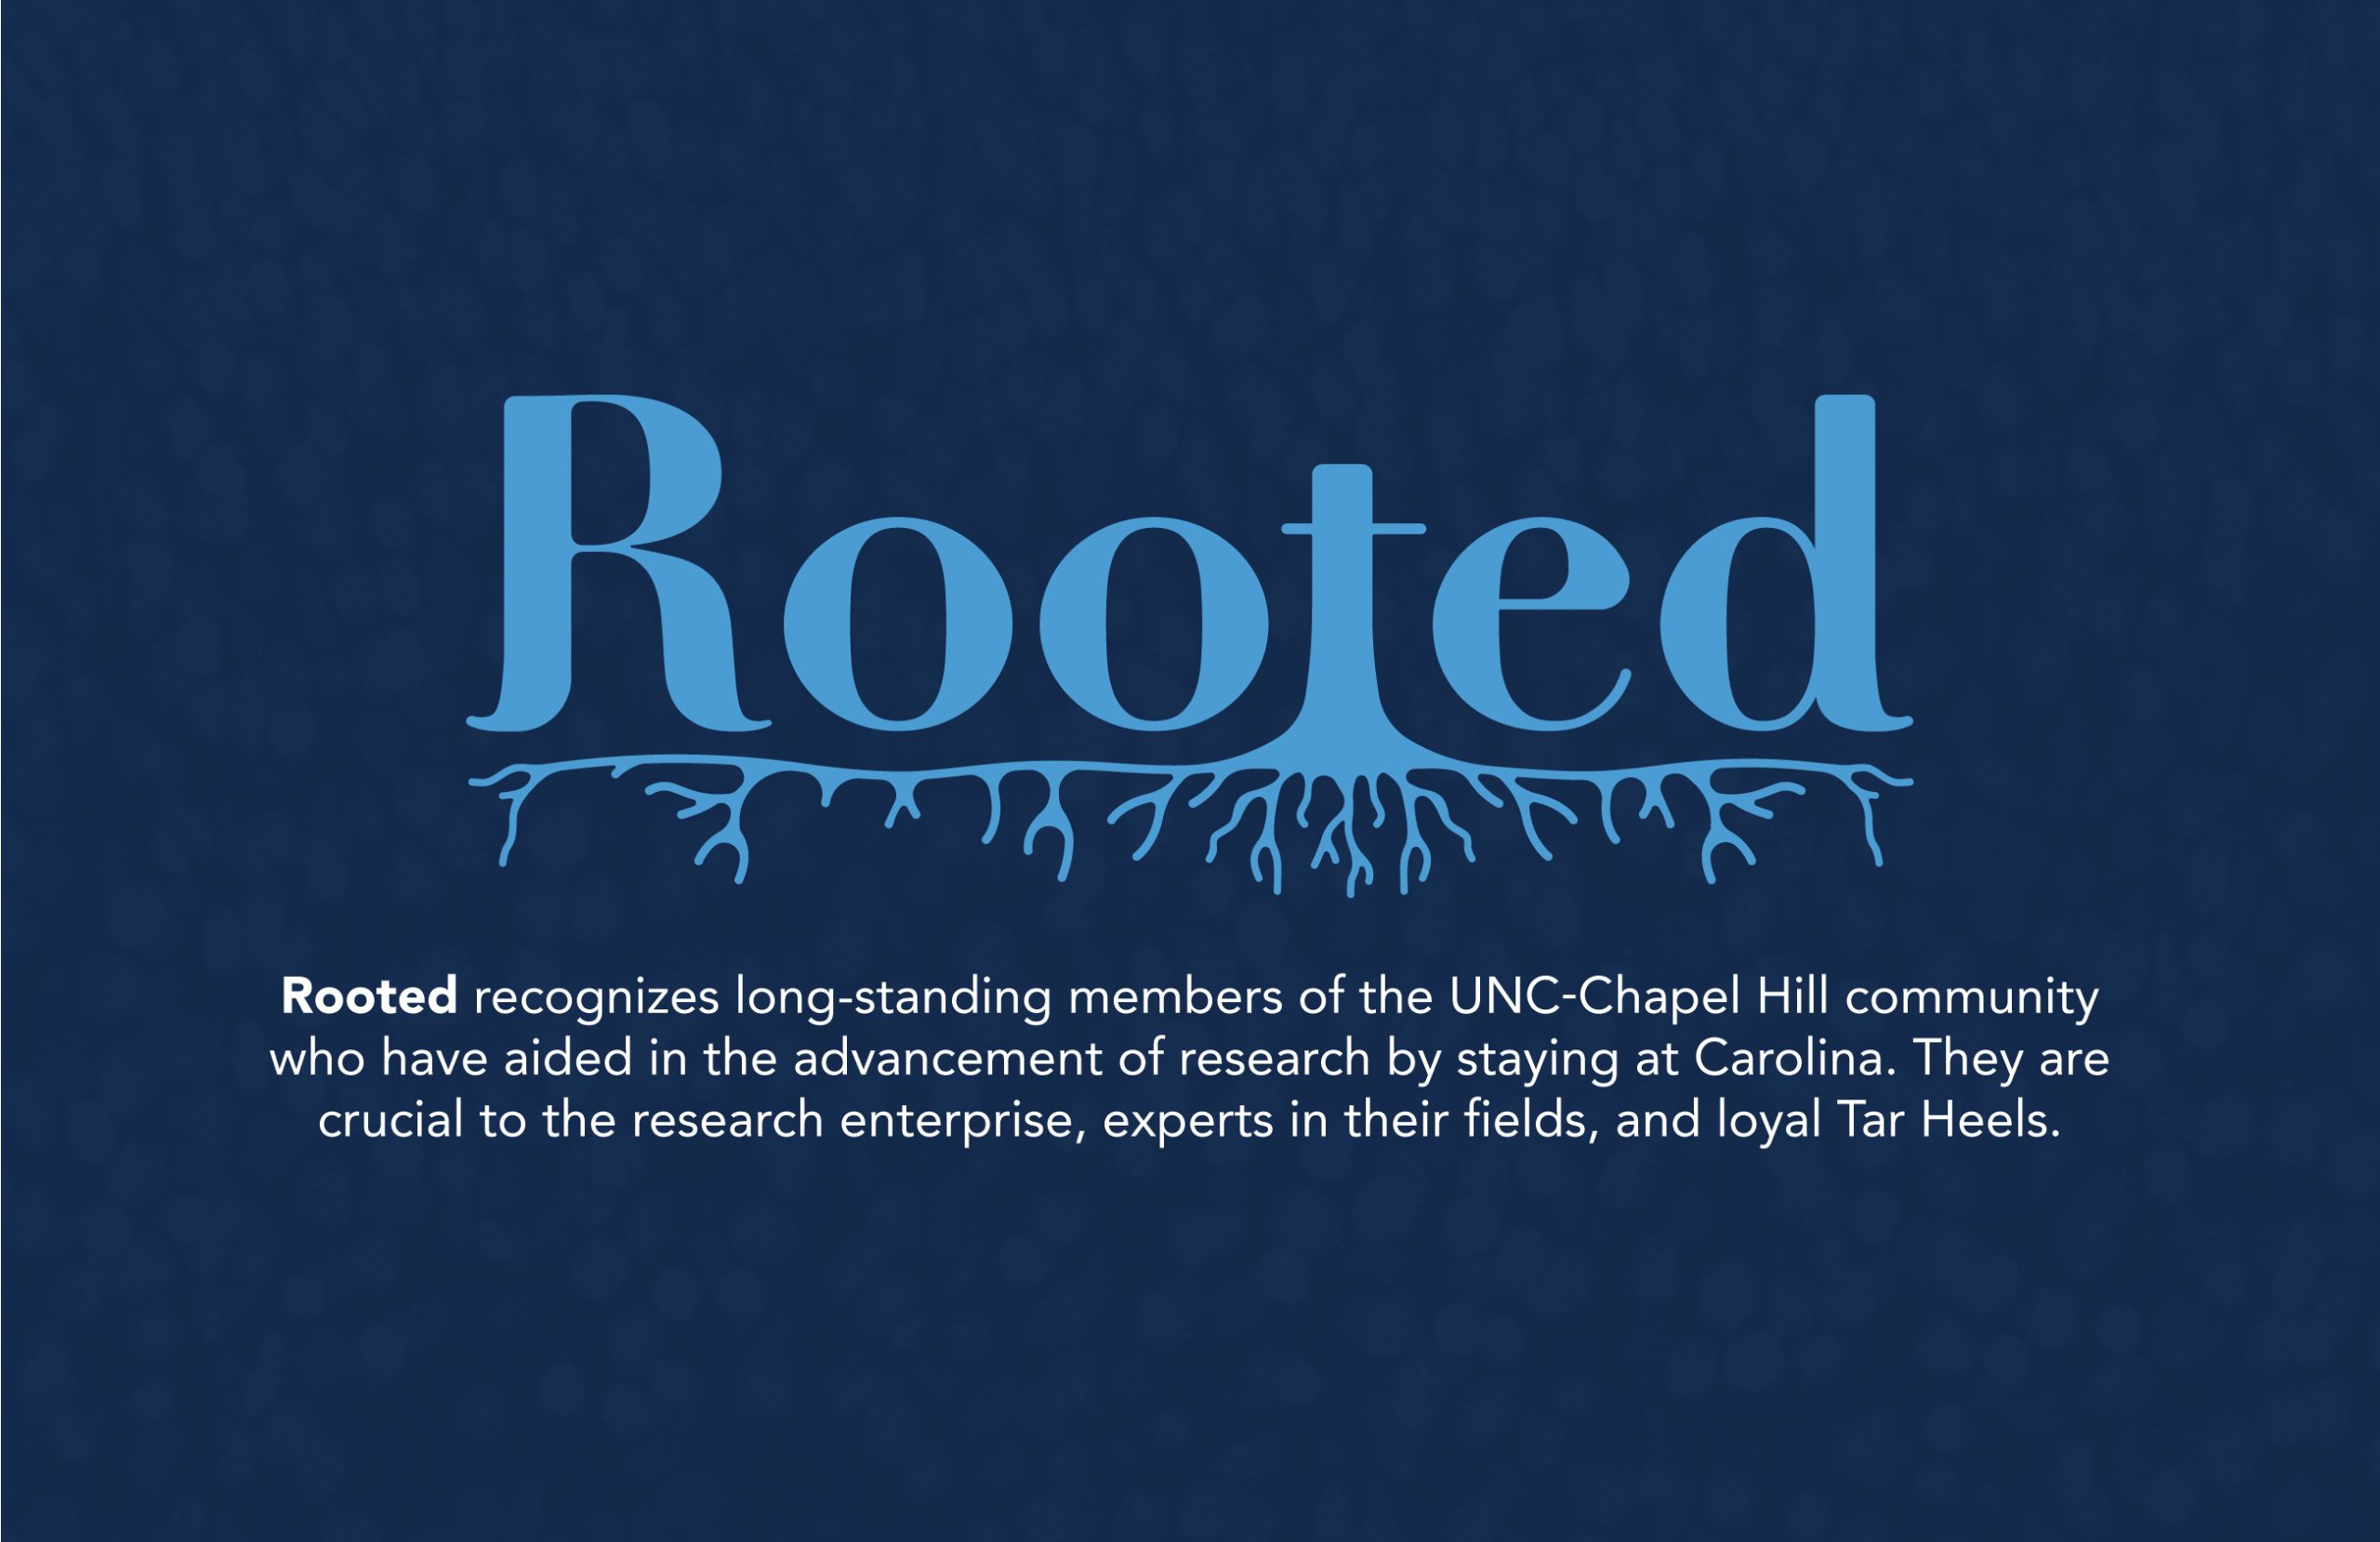 Rooted recognizes long-standing members of the UNC-Chapel Hill community who have aided in the advancement of research by staying at Carolina. They are crucial to the research enterprise, experts in their fields, and loyal Tar Heels. Click here to read more.